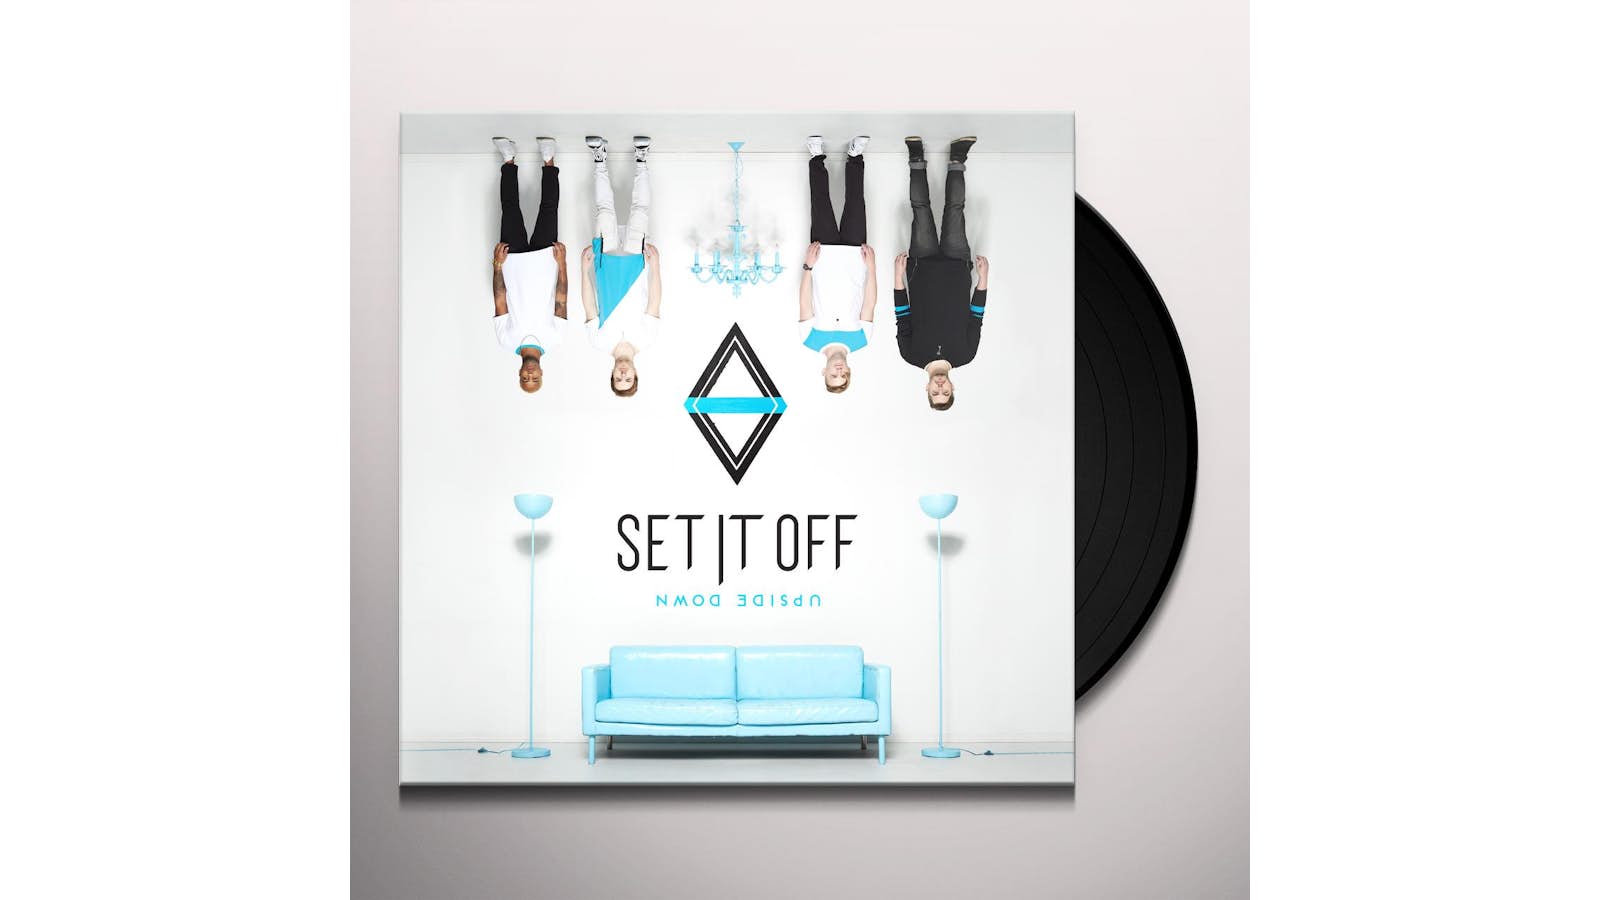 Set It Off - The limited edition pressing of Upside Down on white with blue  splatter vinyl is shipping now from setitoff.merchnow.com!